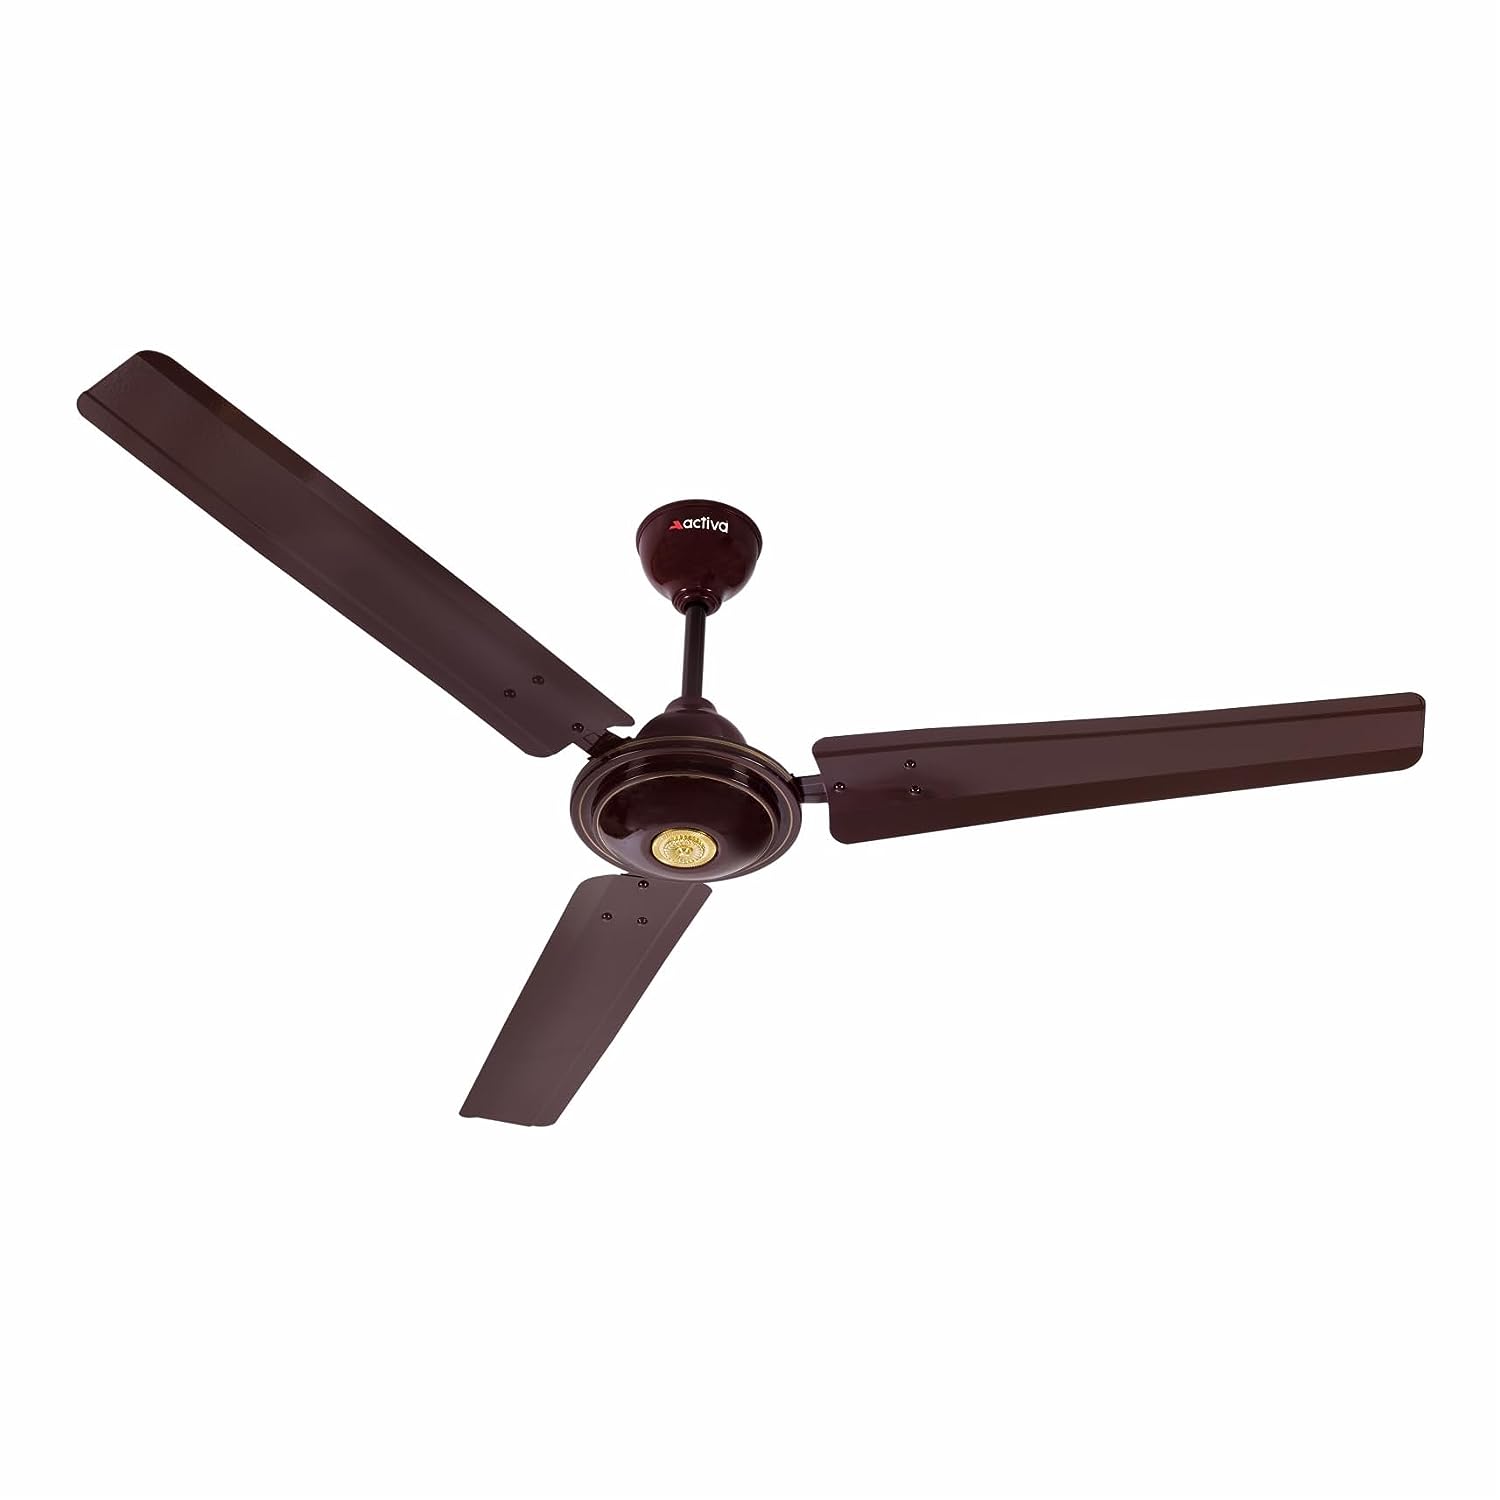 ACTIVA 390 RPM 1200mm High Speed BEE Approved Apsra Ceiling Fan Brown-2 Years Warranty-offers & Discounts- 